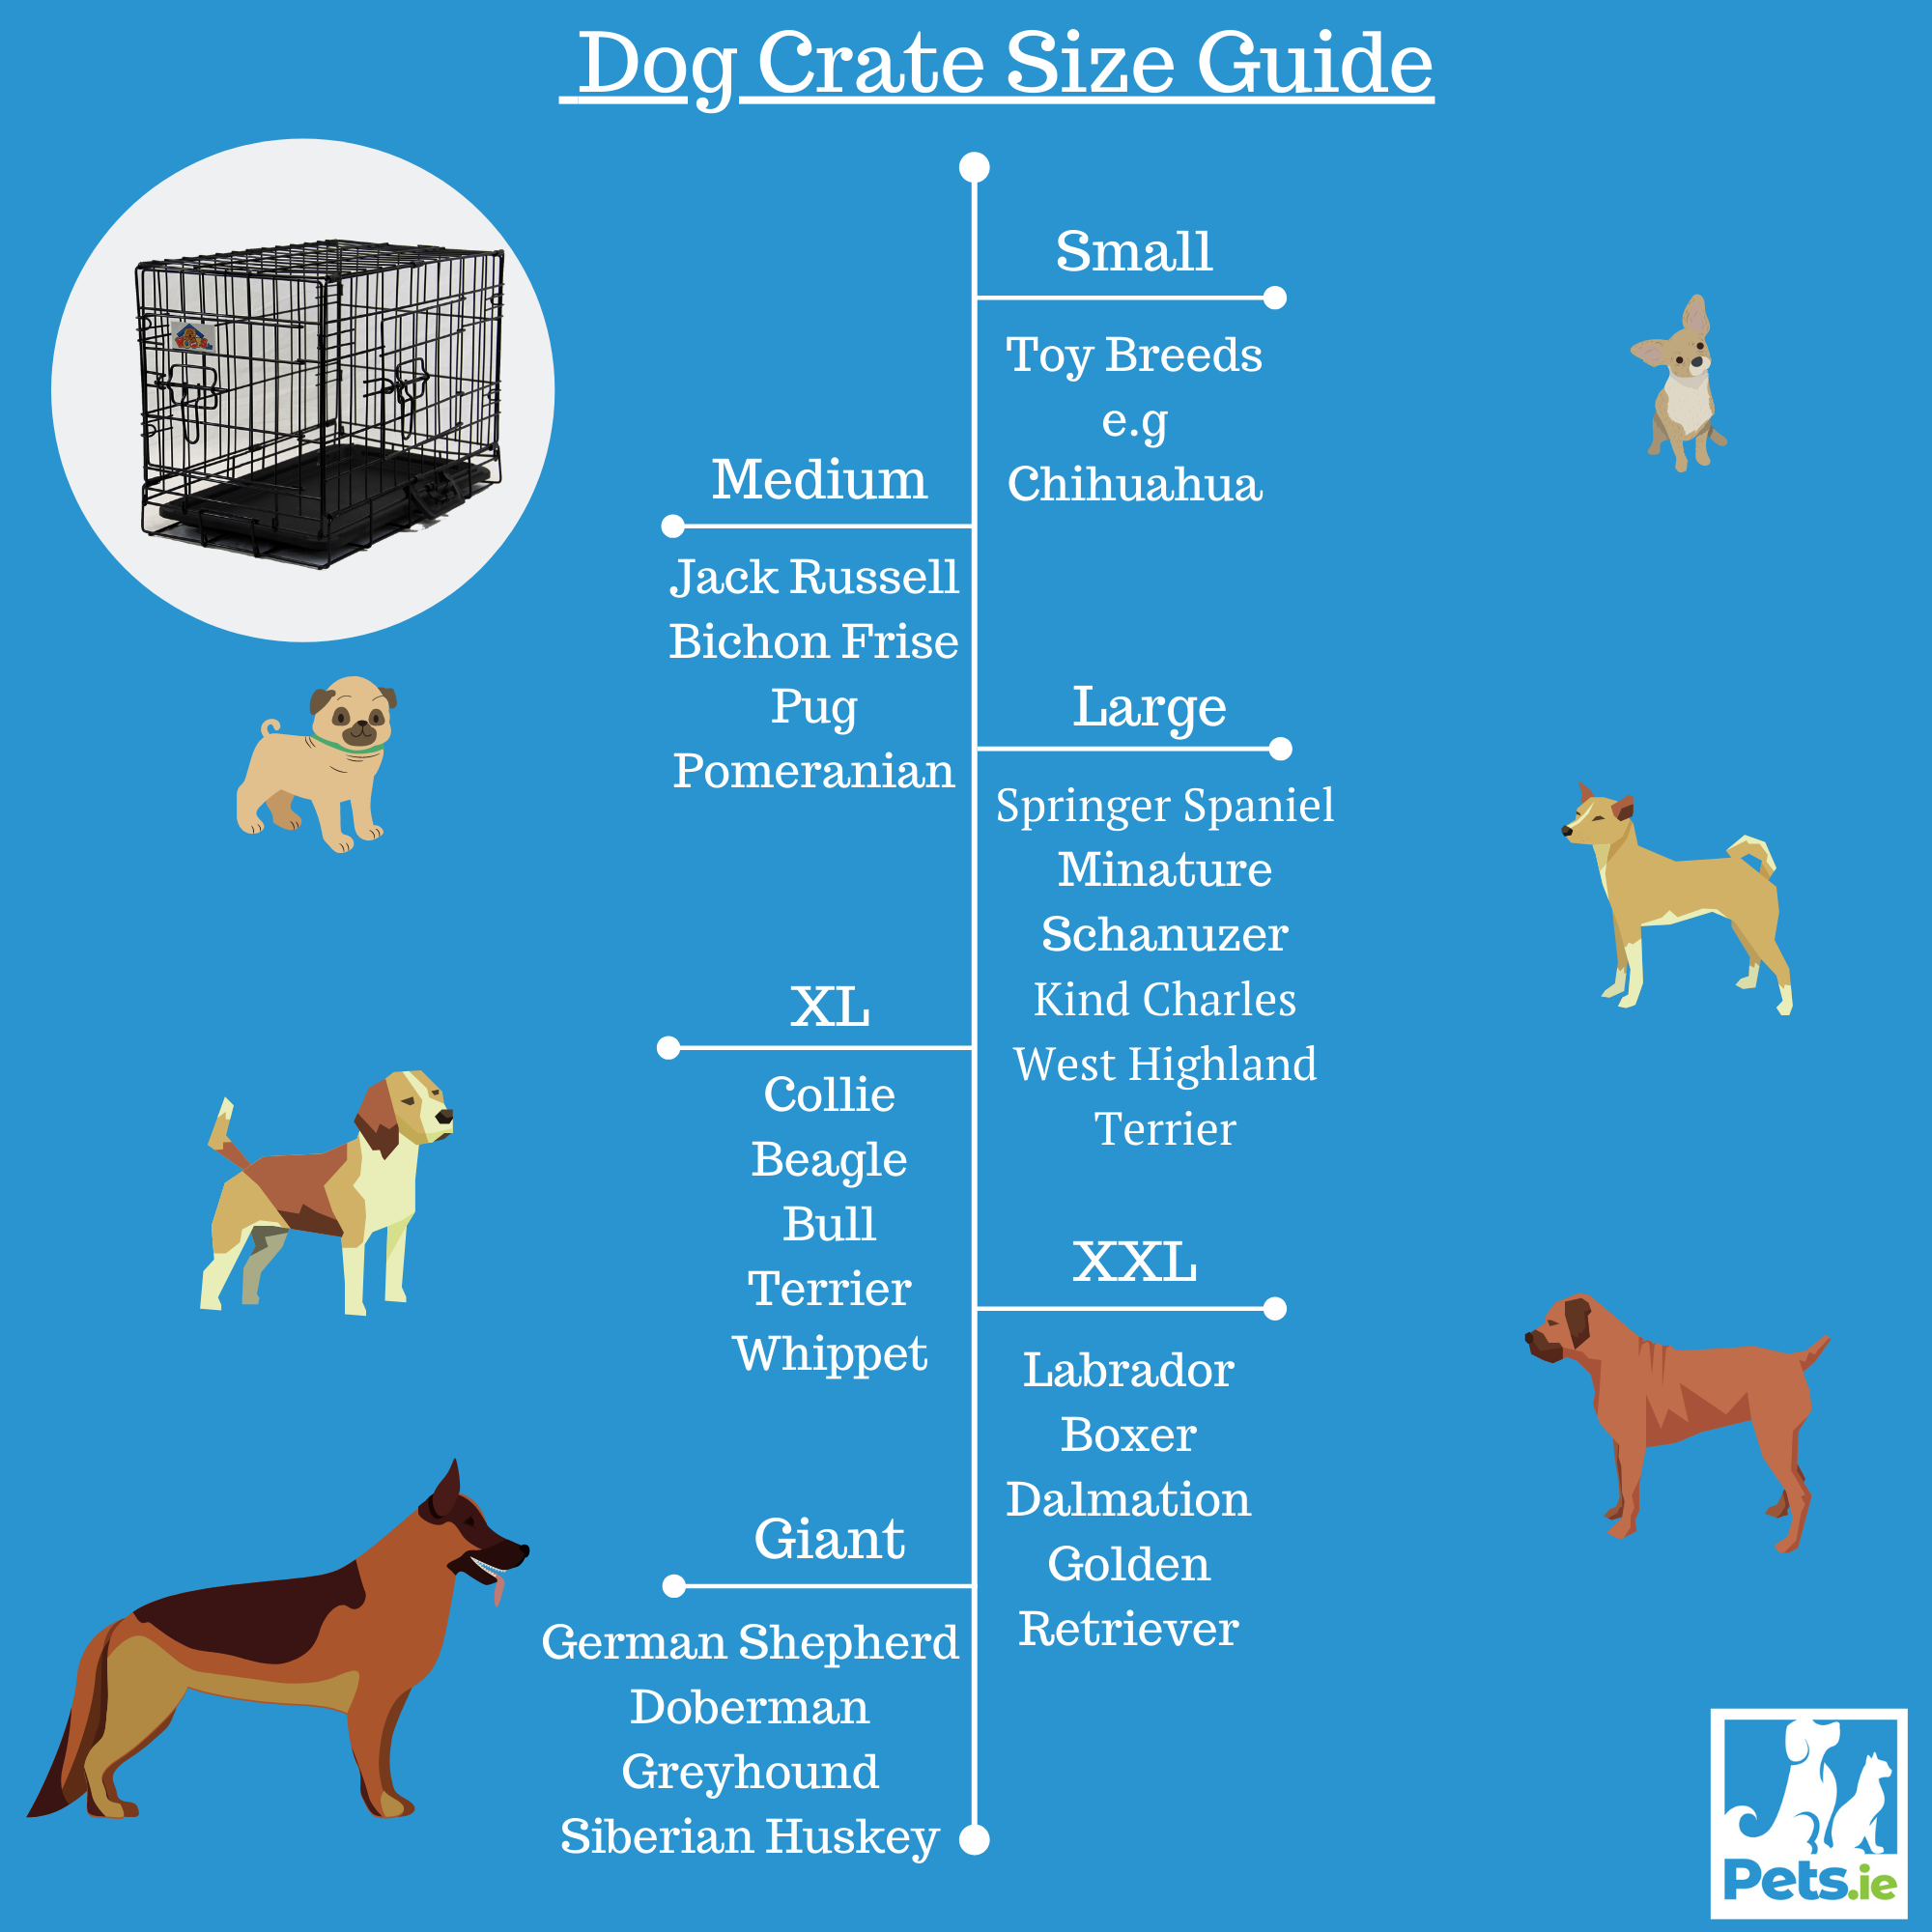 Dog_Crate_size_guide_final.png